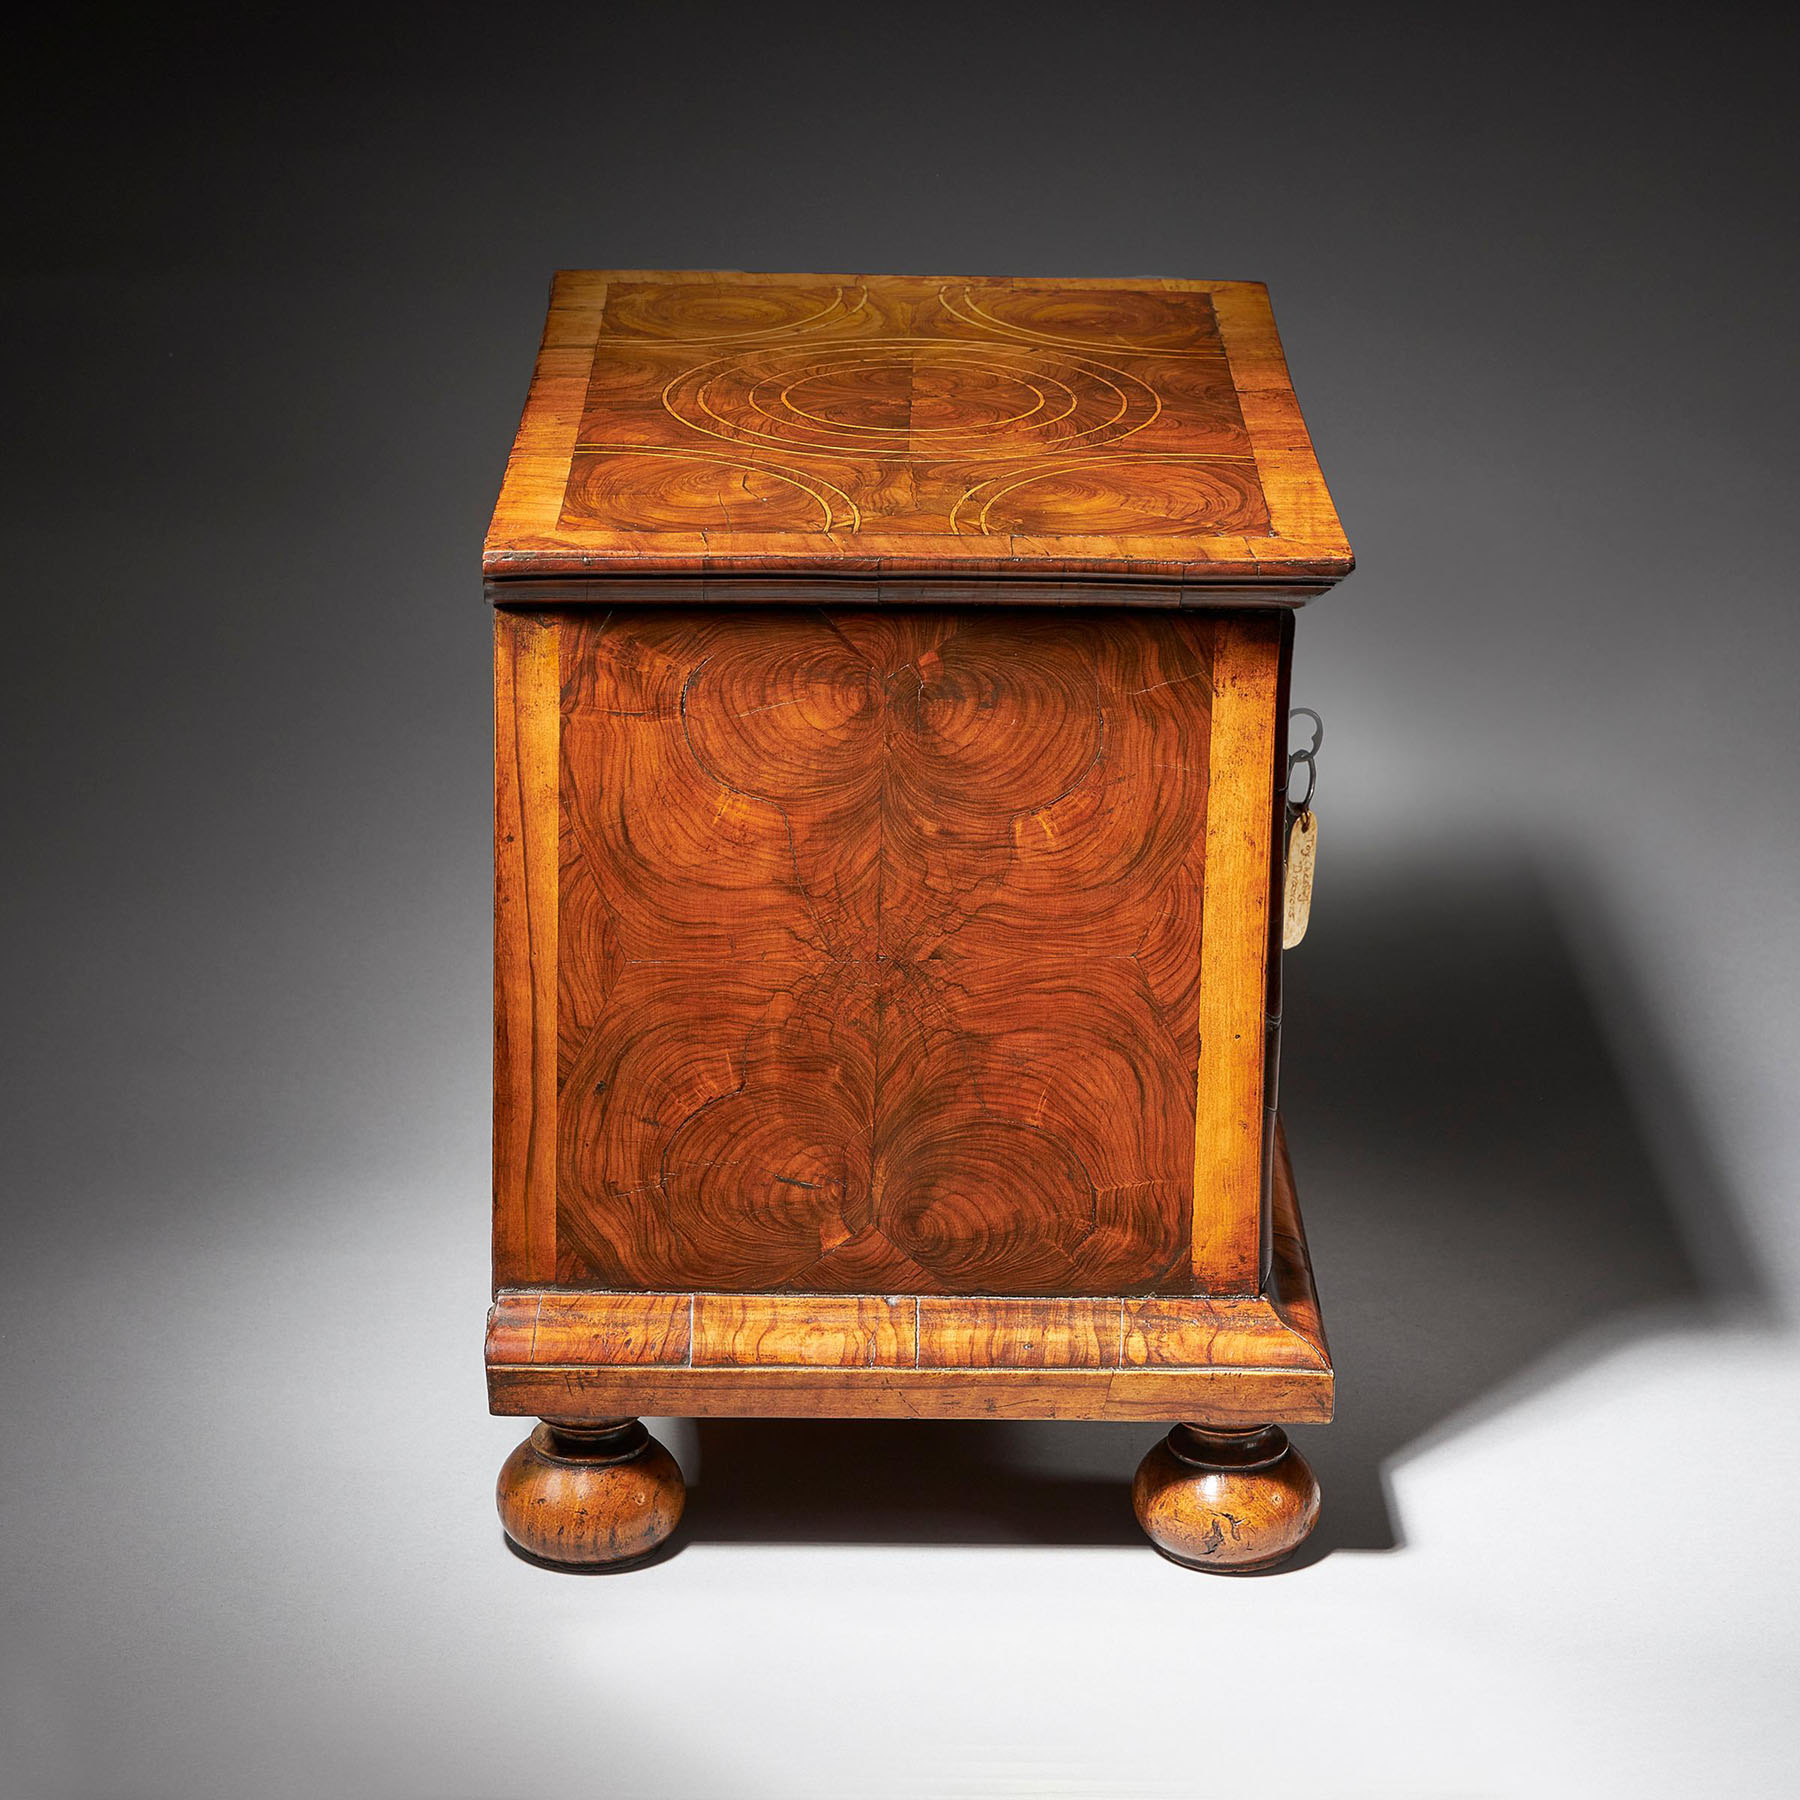 Diminutive 17th century William and Mary Olive Oyster Miniature Chest of Drawers 13